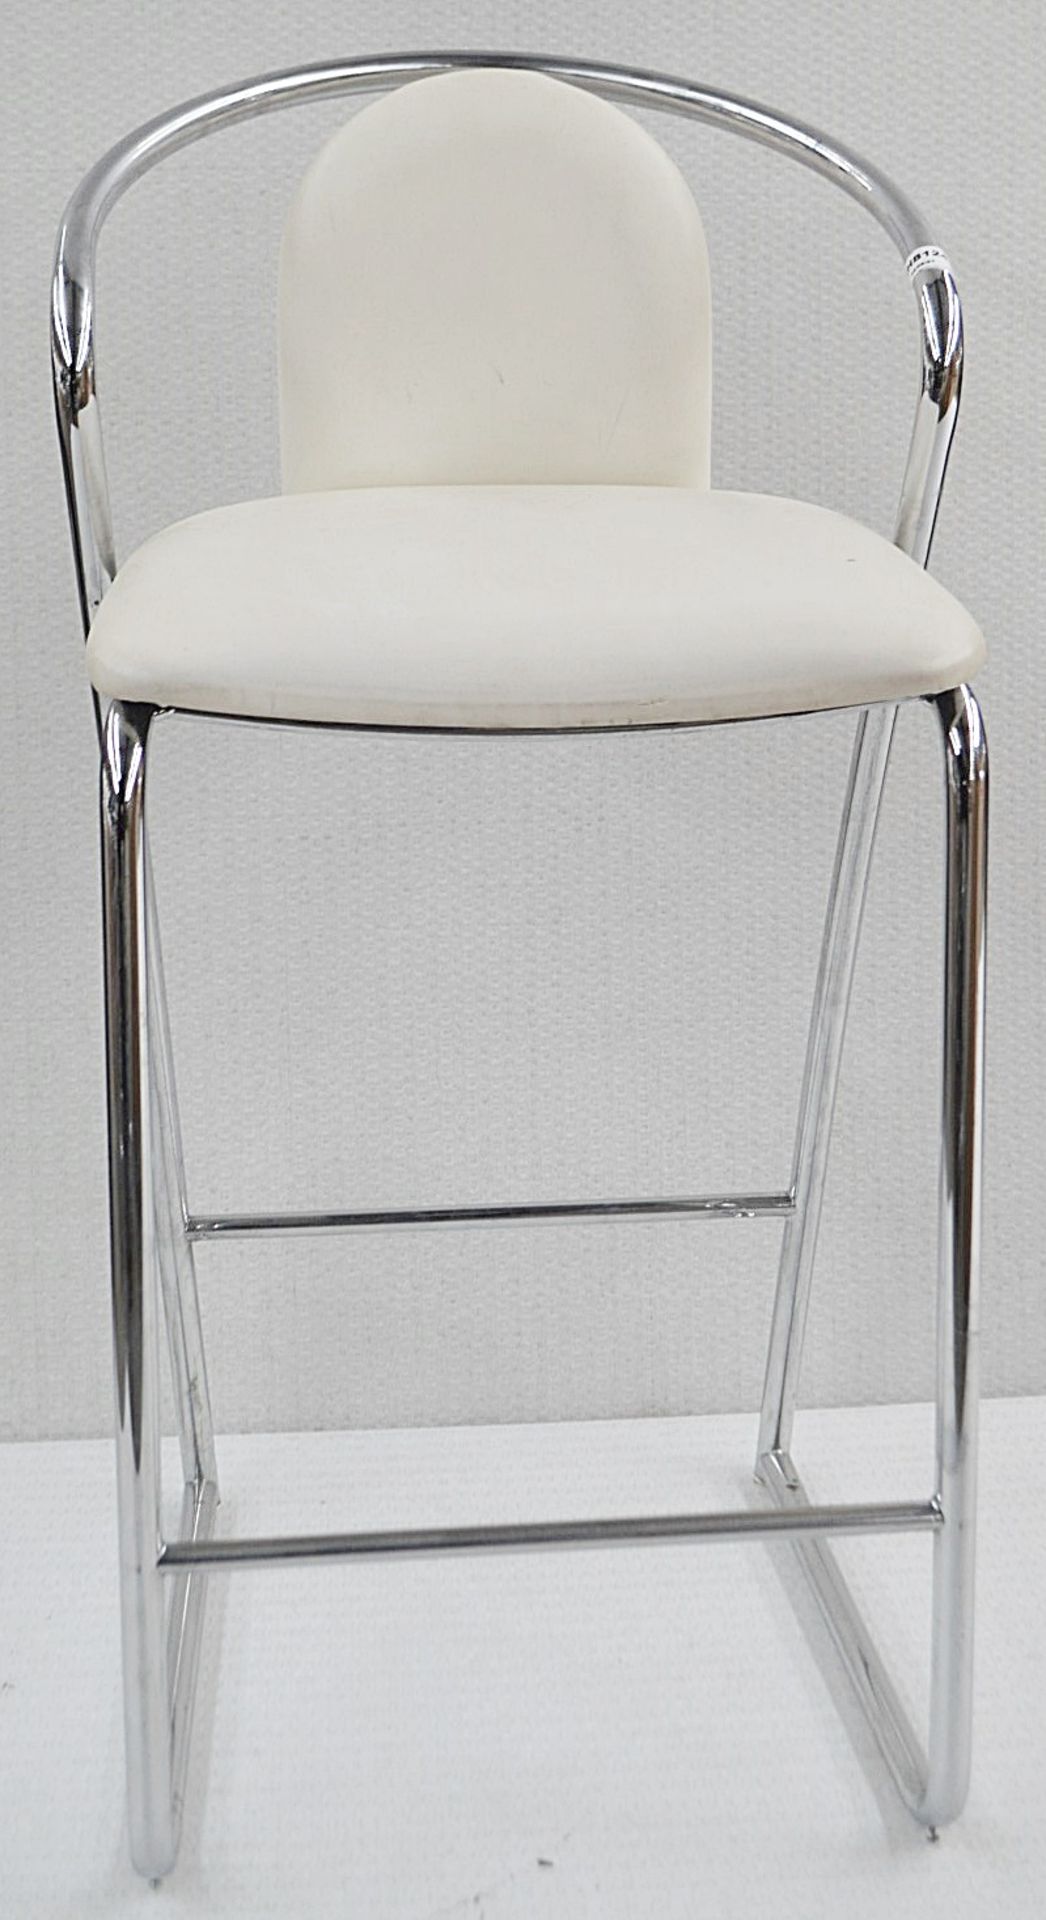 7 x Upholstered Salon / Beauty Counter Stools In Light Cream And Chrome - Dimensions: W47 x D50 x